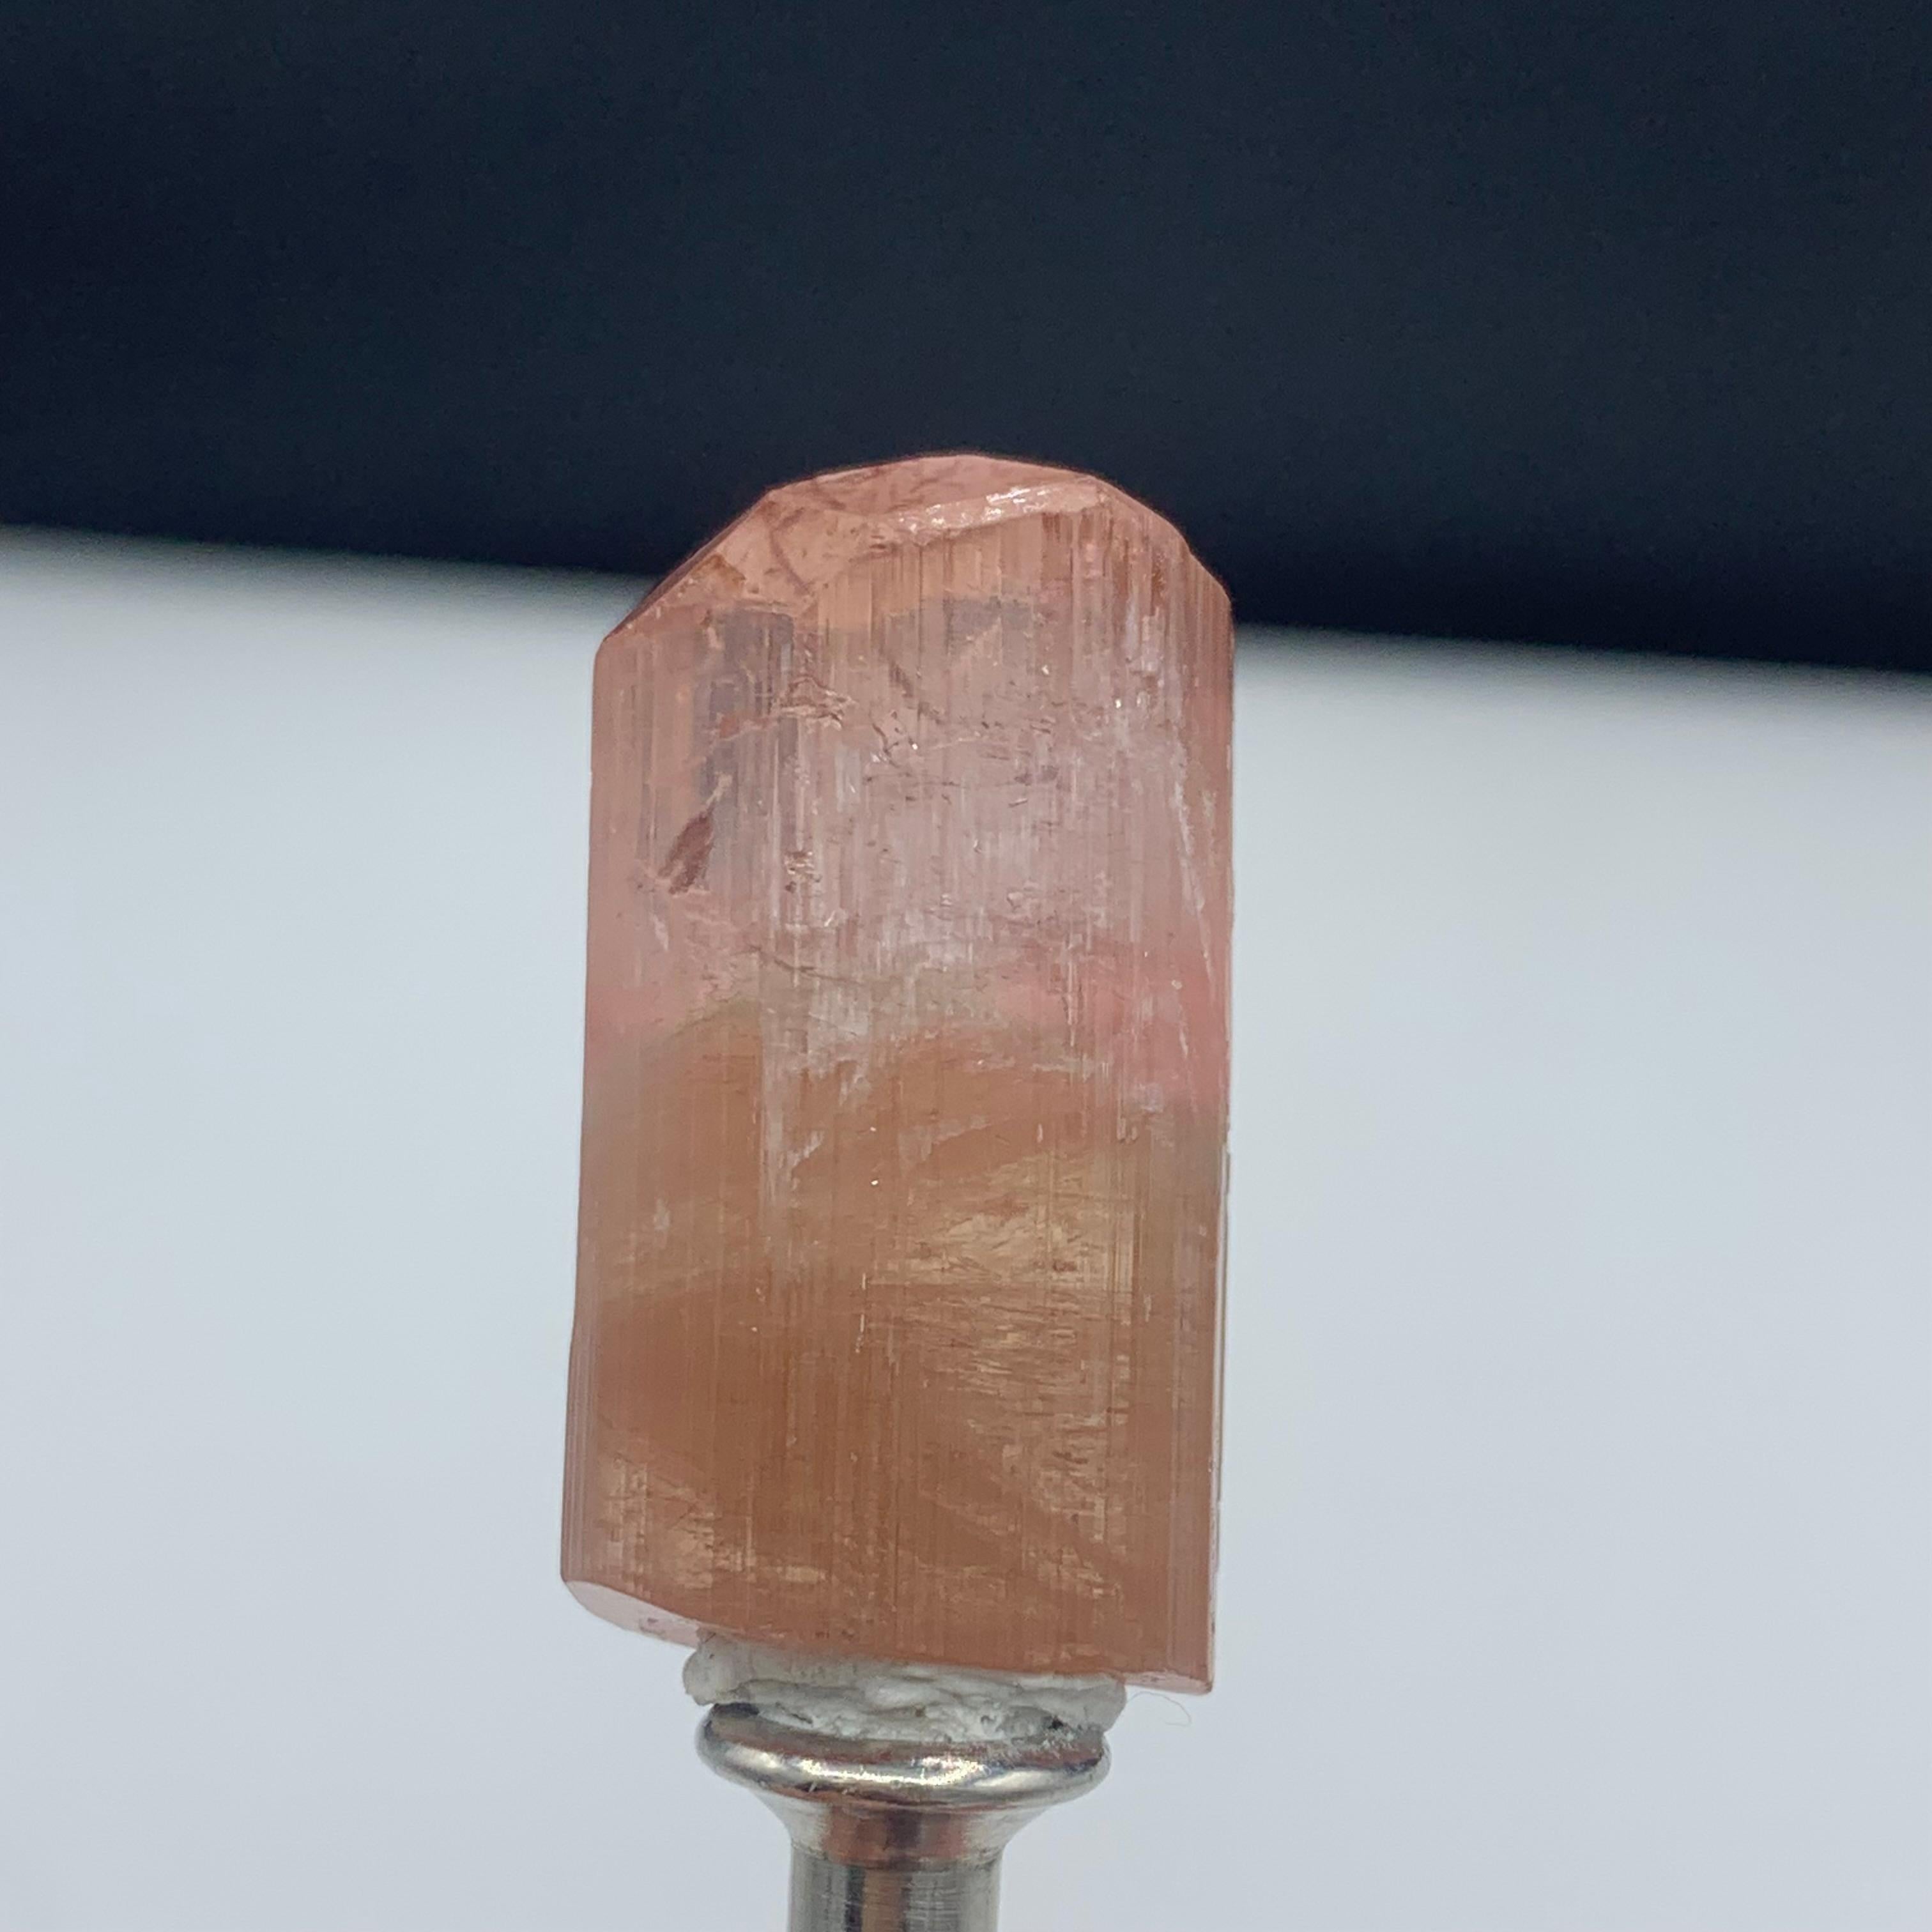 50.00 Carat Amazing Peach Color Terminated Tourmaline Crystal From Afghanistan For Sale 2